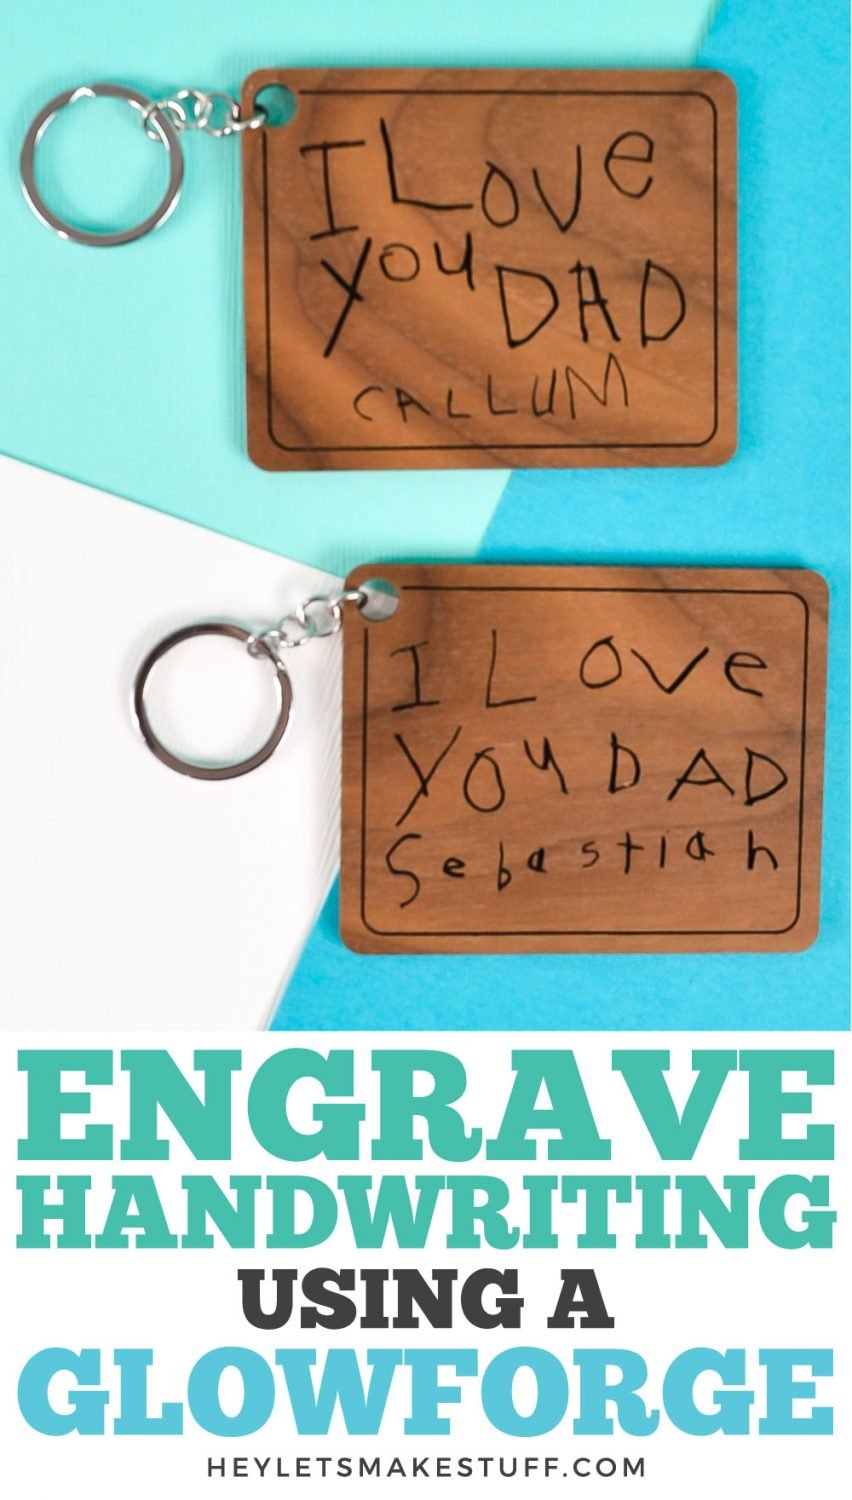 Preserve your child's sweet handwriting in wood or metal! Learn how to digitize and engrave a child's handwriting using a Glowforge to make keychains, plaques, jewelry and more!